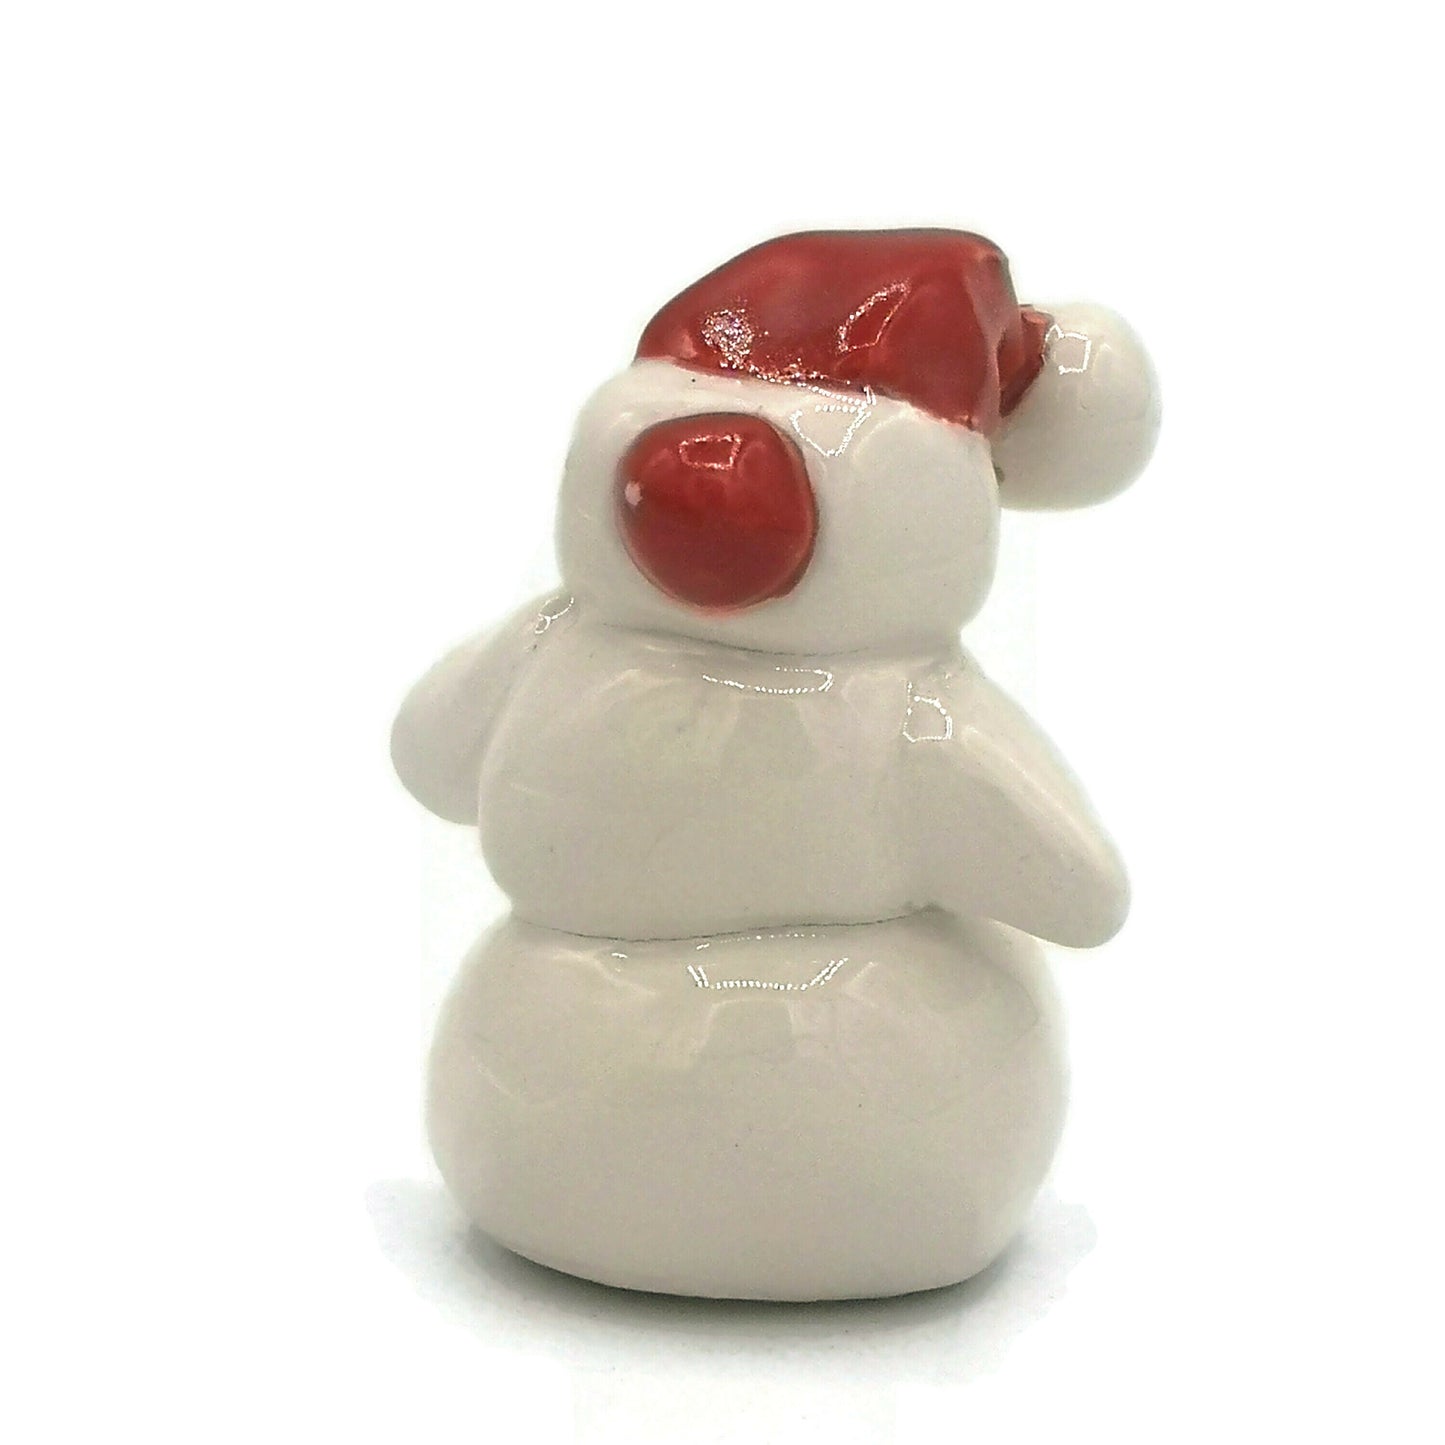 Miniature snowman ornament, Gifts For Her Christmas, ceramic snowman figurine, mom christmas gift, Clearance Items, cake topper - Ceramica Ana Rafael